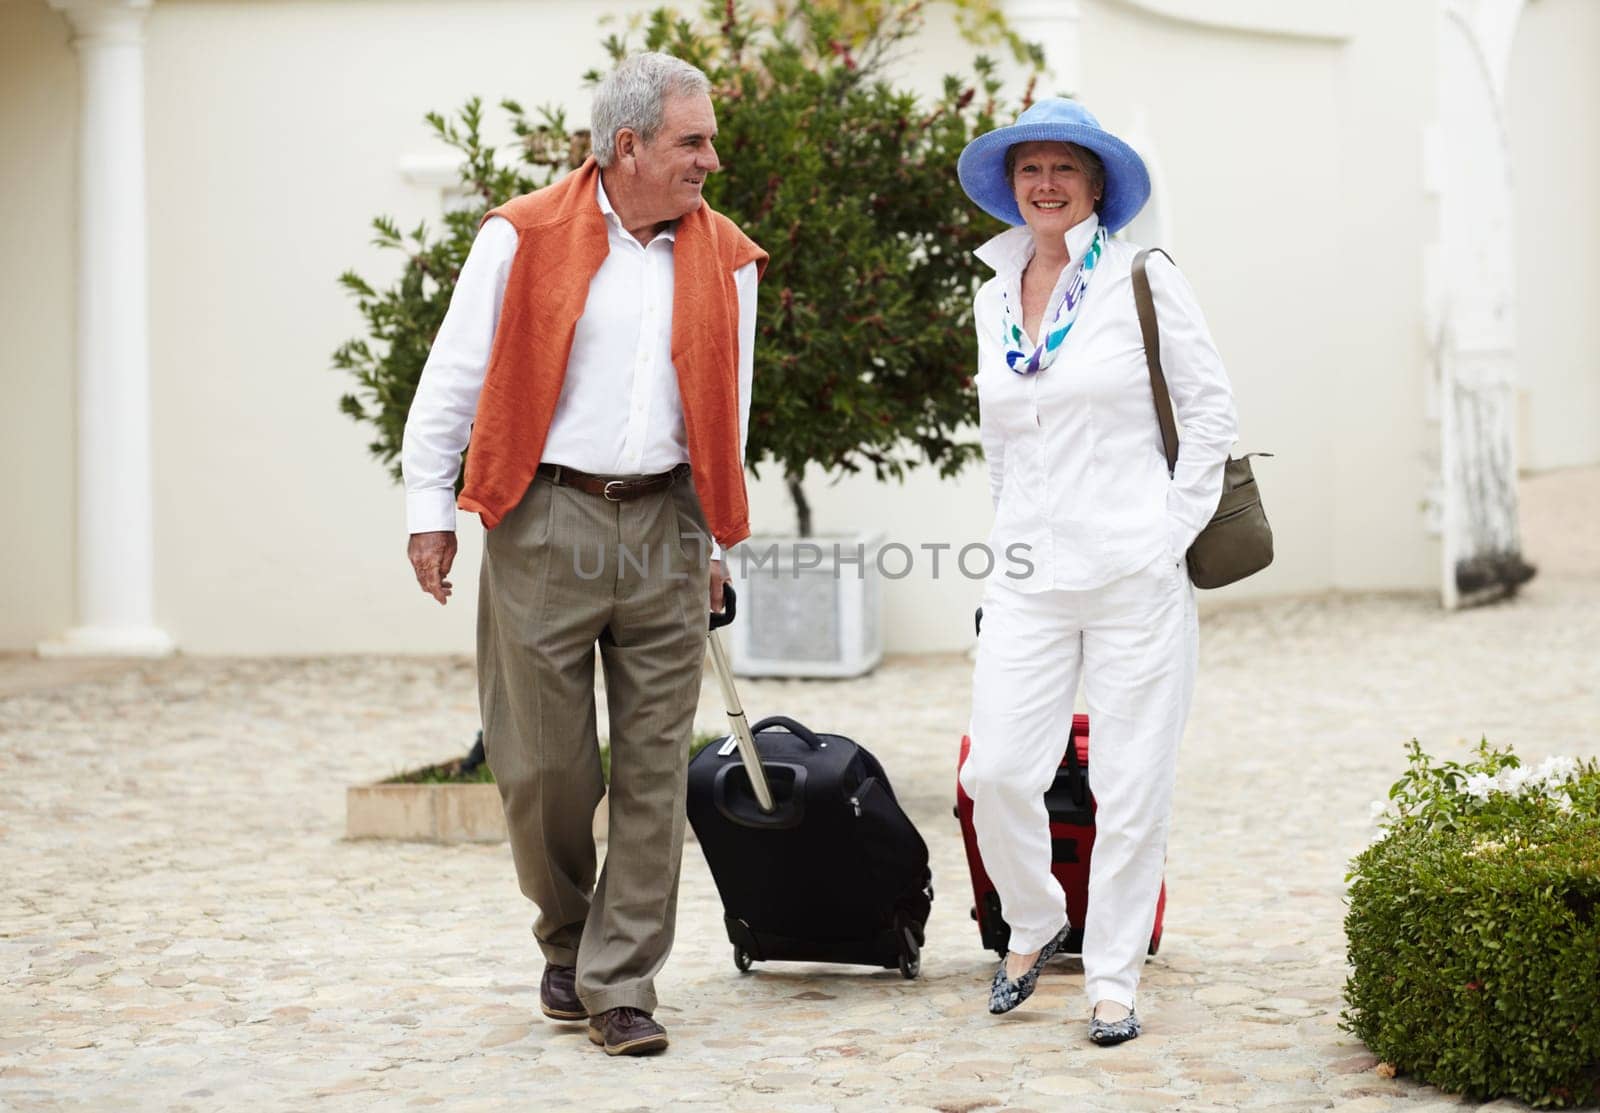 Travel, suitcase and senior couple walking on vacation in a holiday location happy in retirement together at a hotel. Bag, smile and elderly people on a journey or man and woman walk in happiness.